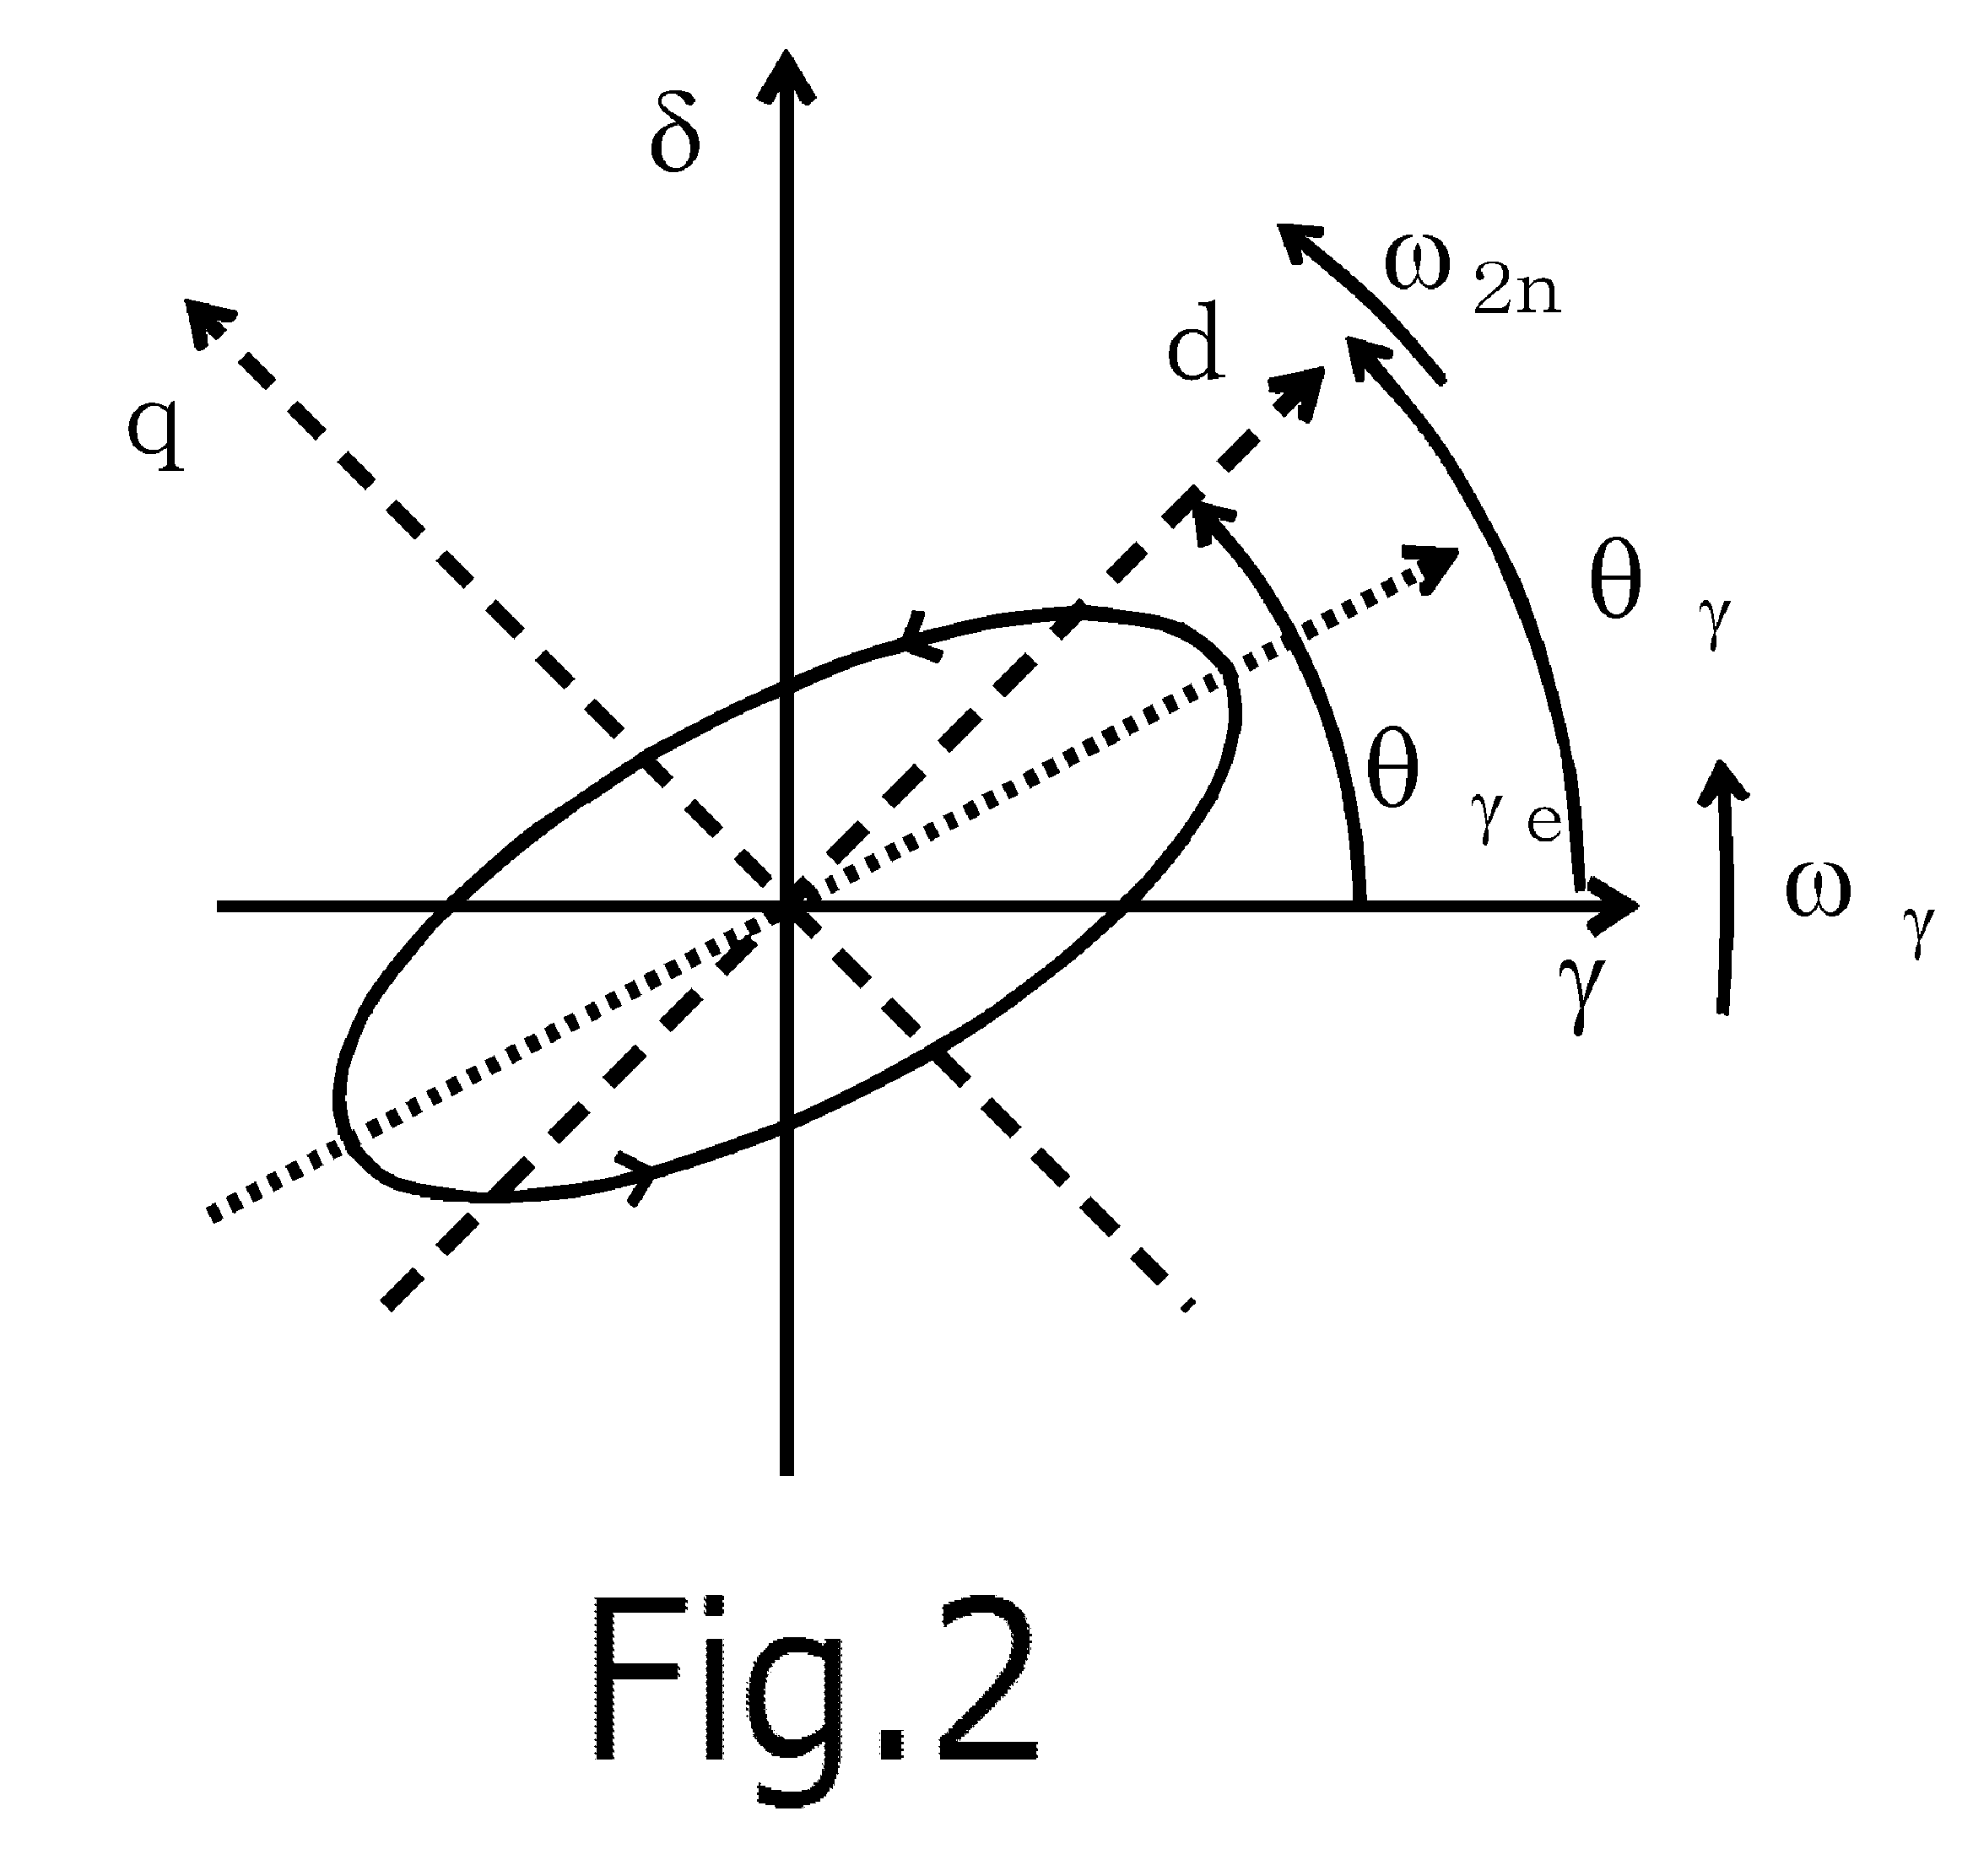 Rotor phase/speed estimating device for an AC motor